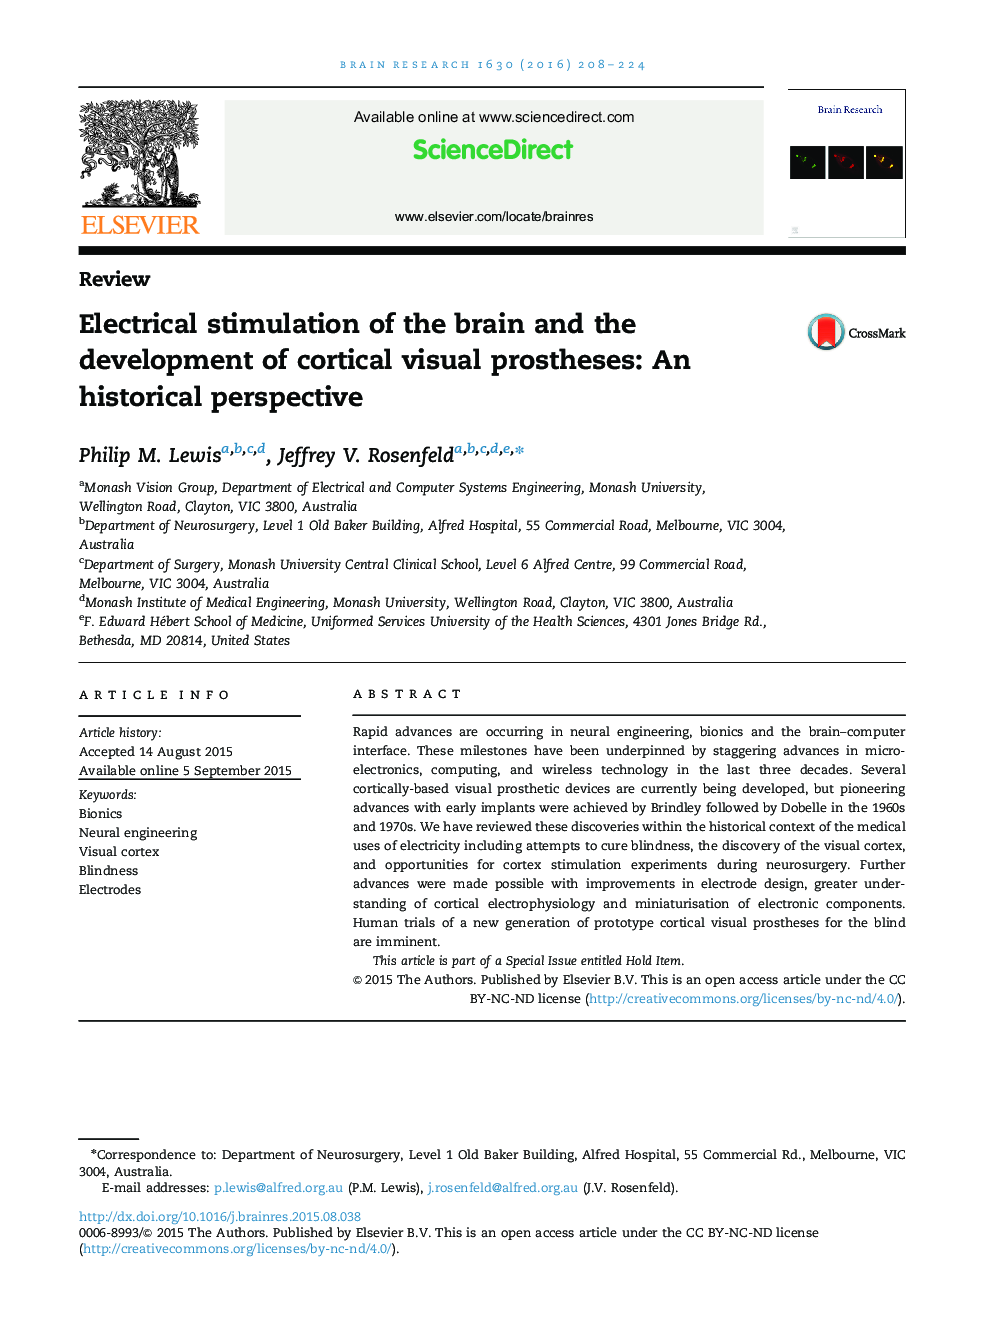 ReviewElectrical stimulation of the brain and the development of cortical visual prostheses: An historical perspective